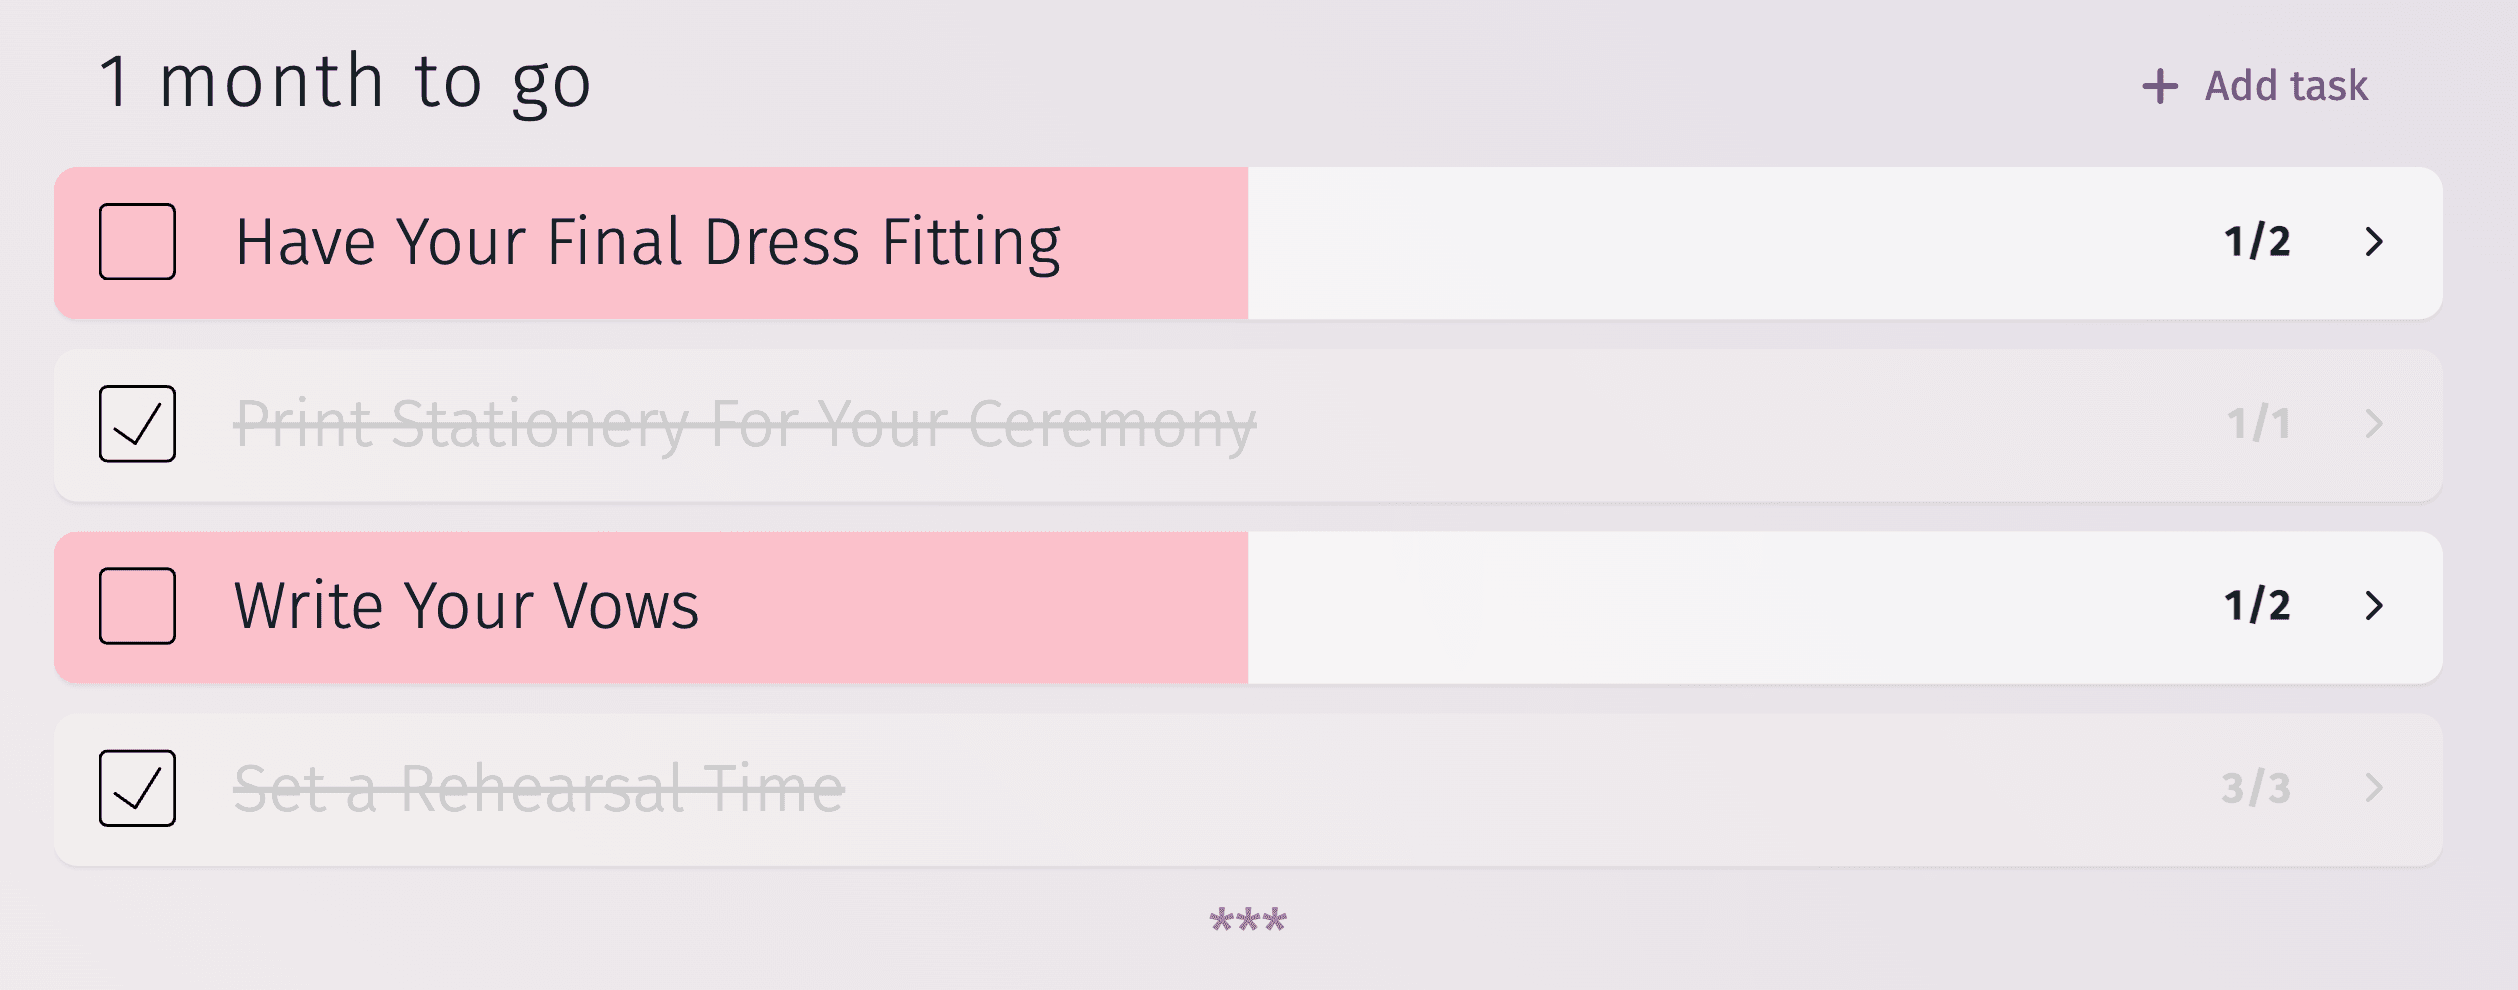 Color-coded 6-month timeline for organizing a wedding, with clear checkpoints.